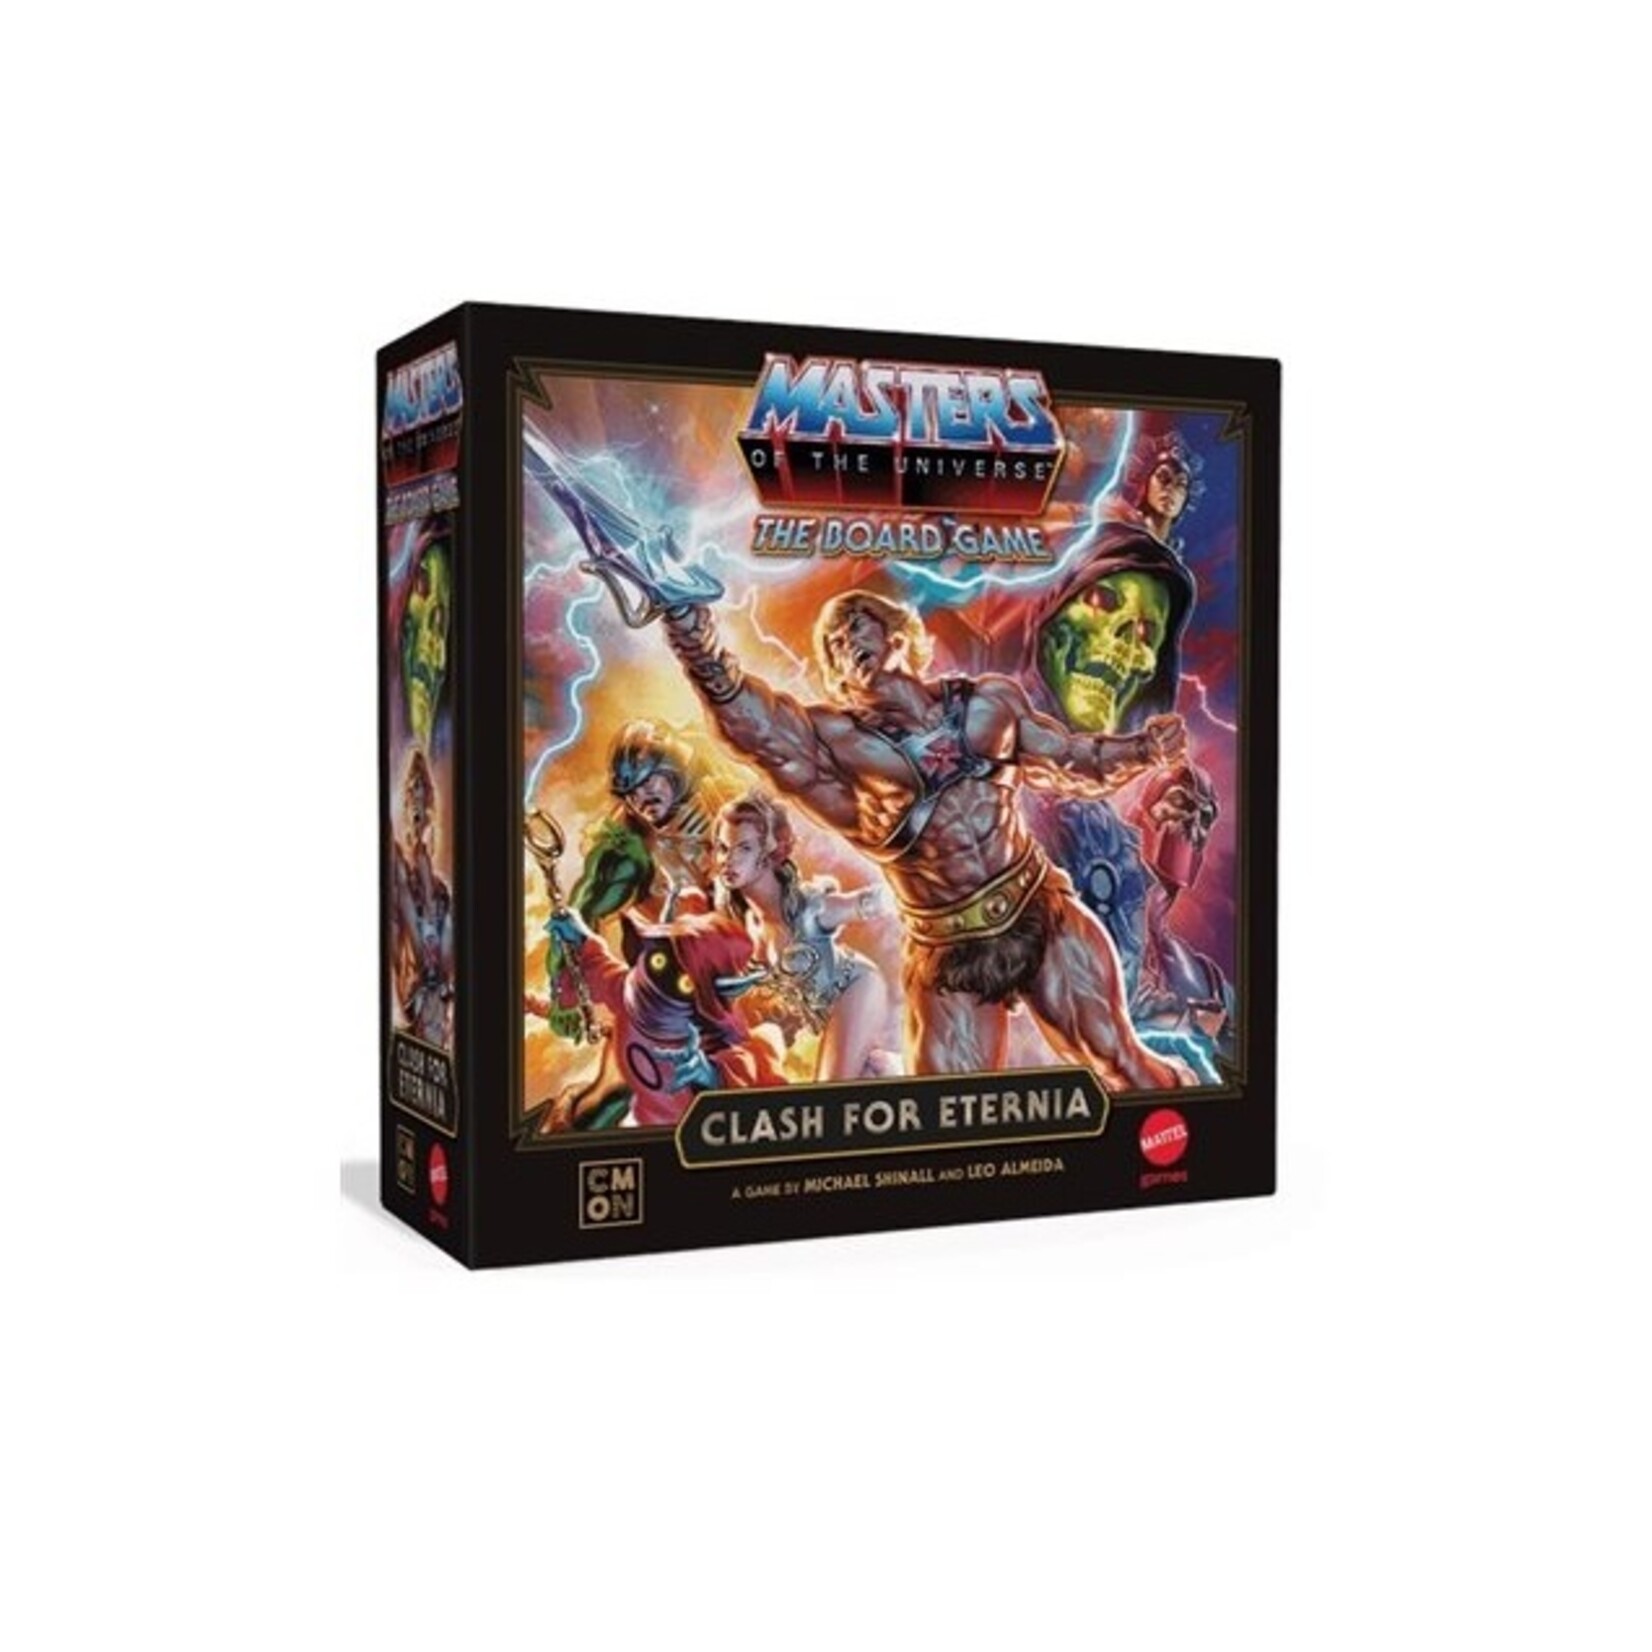 Cmon Masters of the Universe - The Board Game - Clash for Eternia (English)